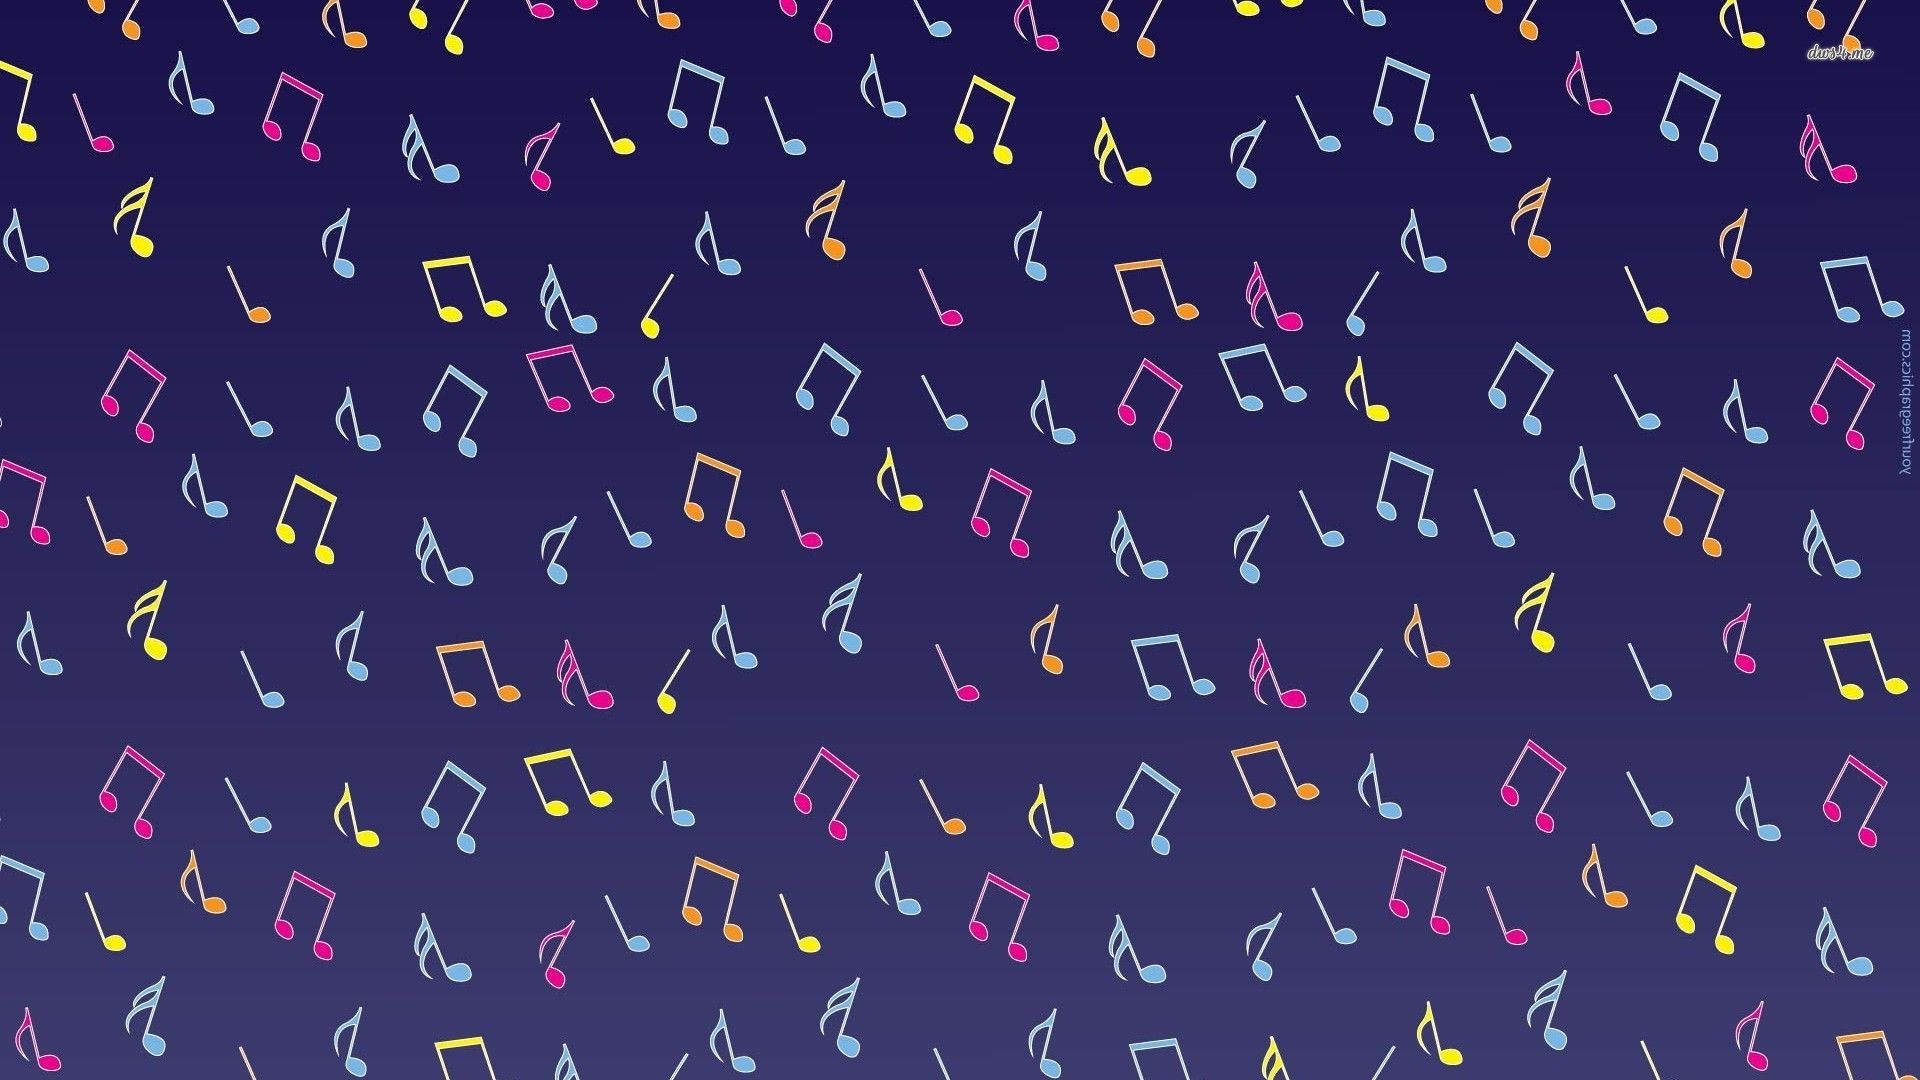 Wallpaper Music Notes Image In